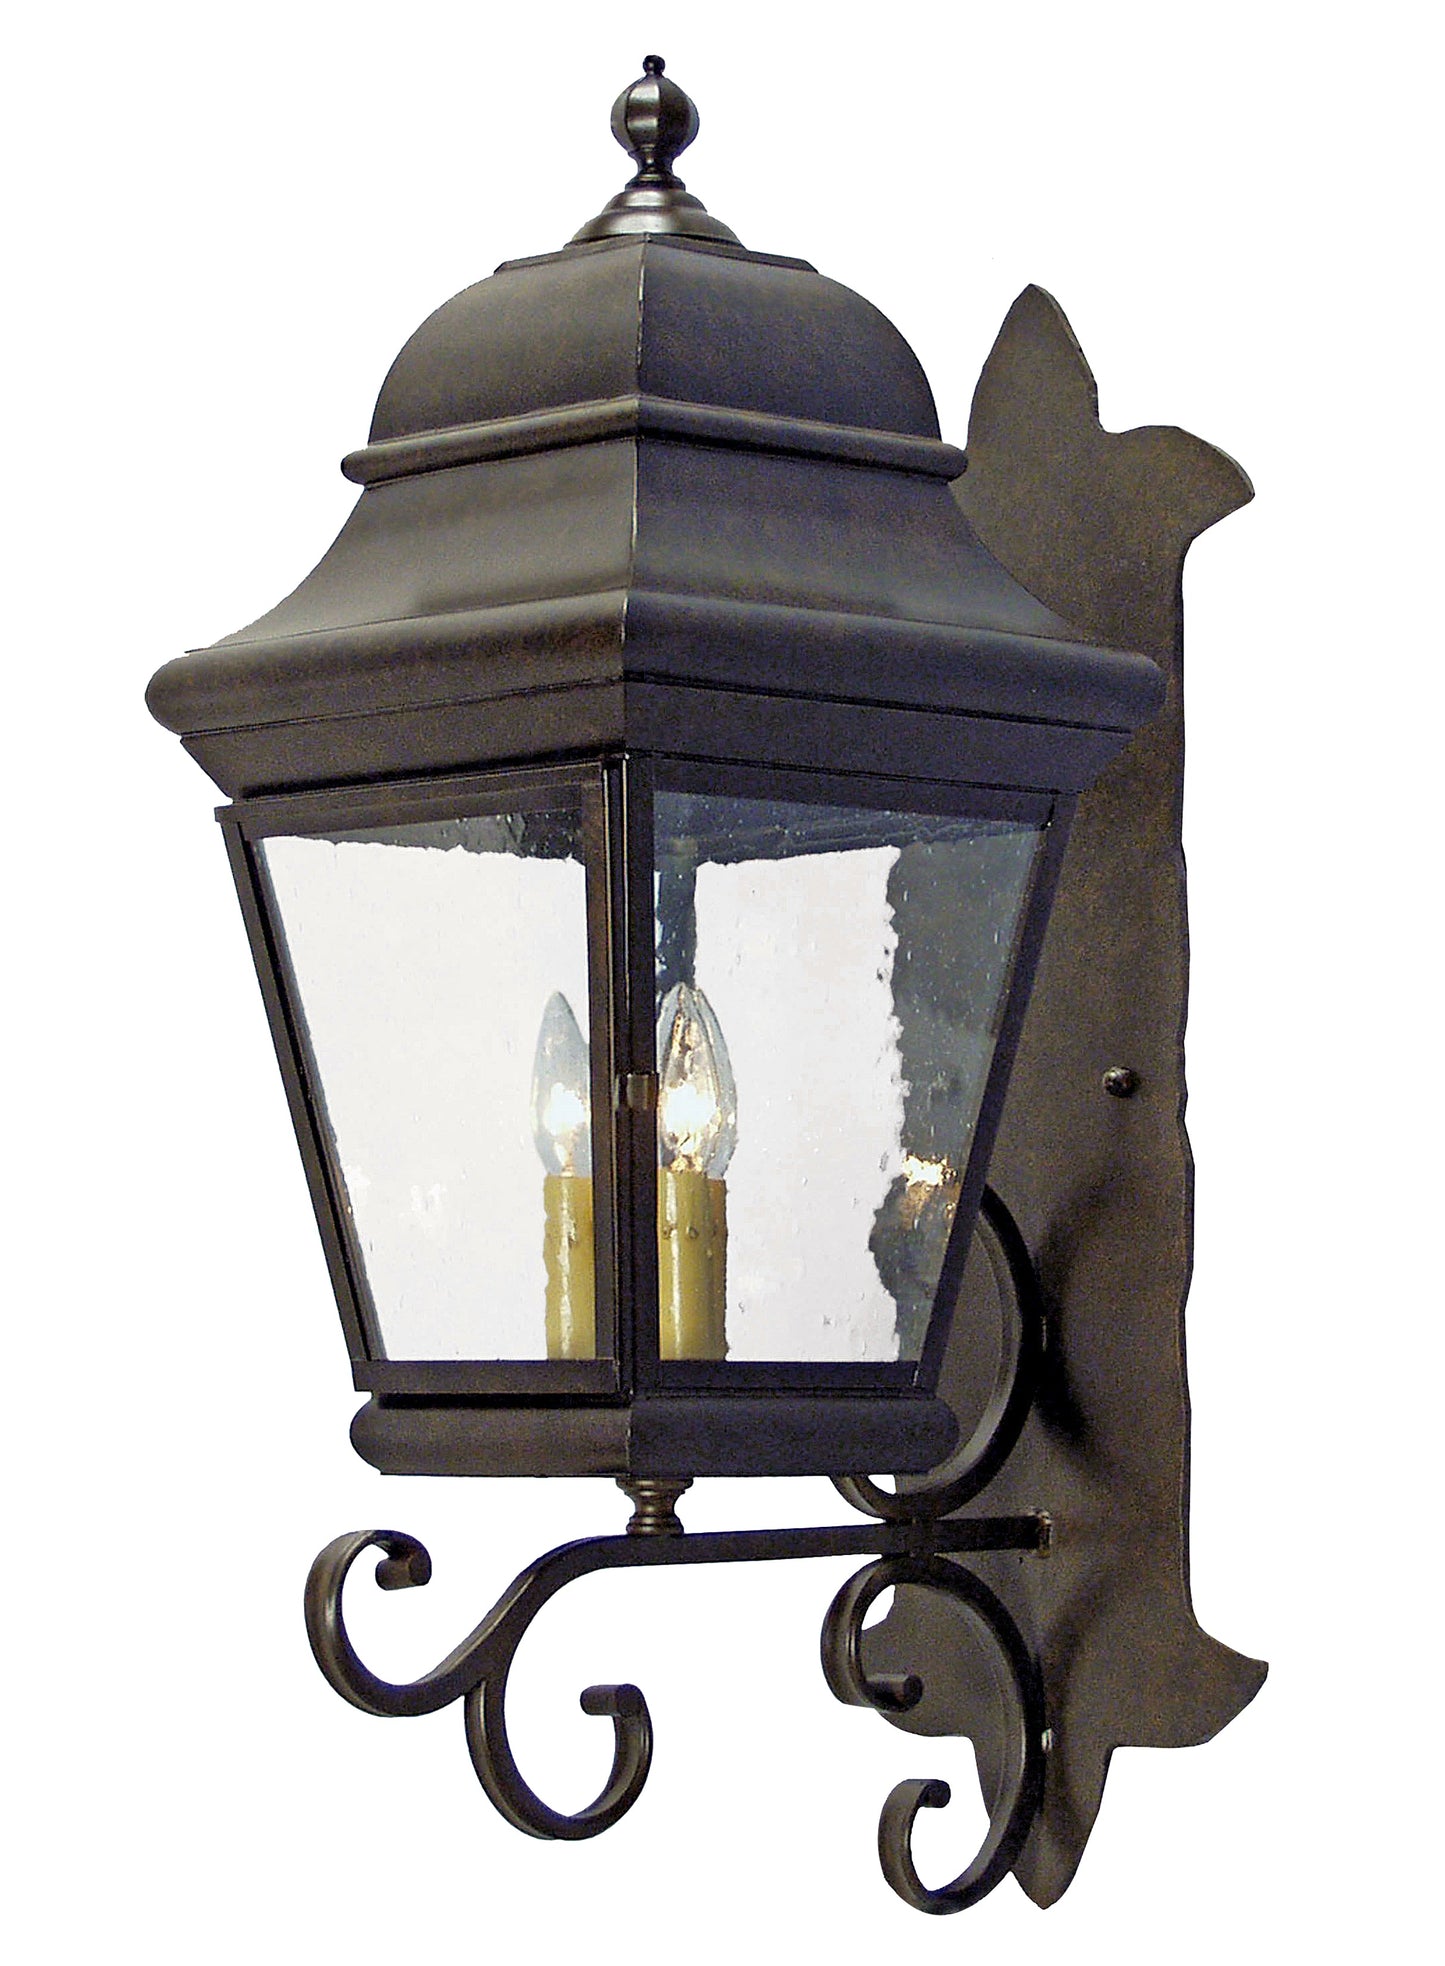 12" Cicero Wall Sconce by 2nd Ave Lighting